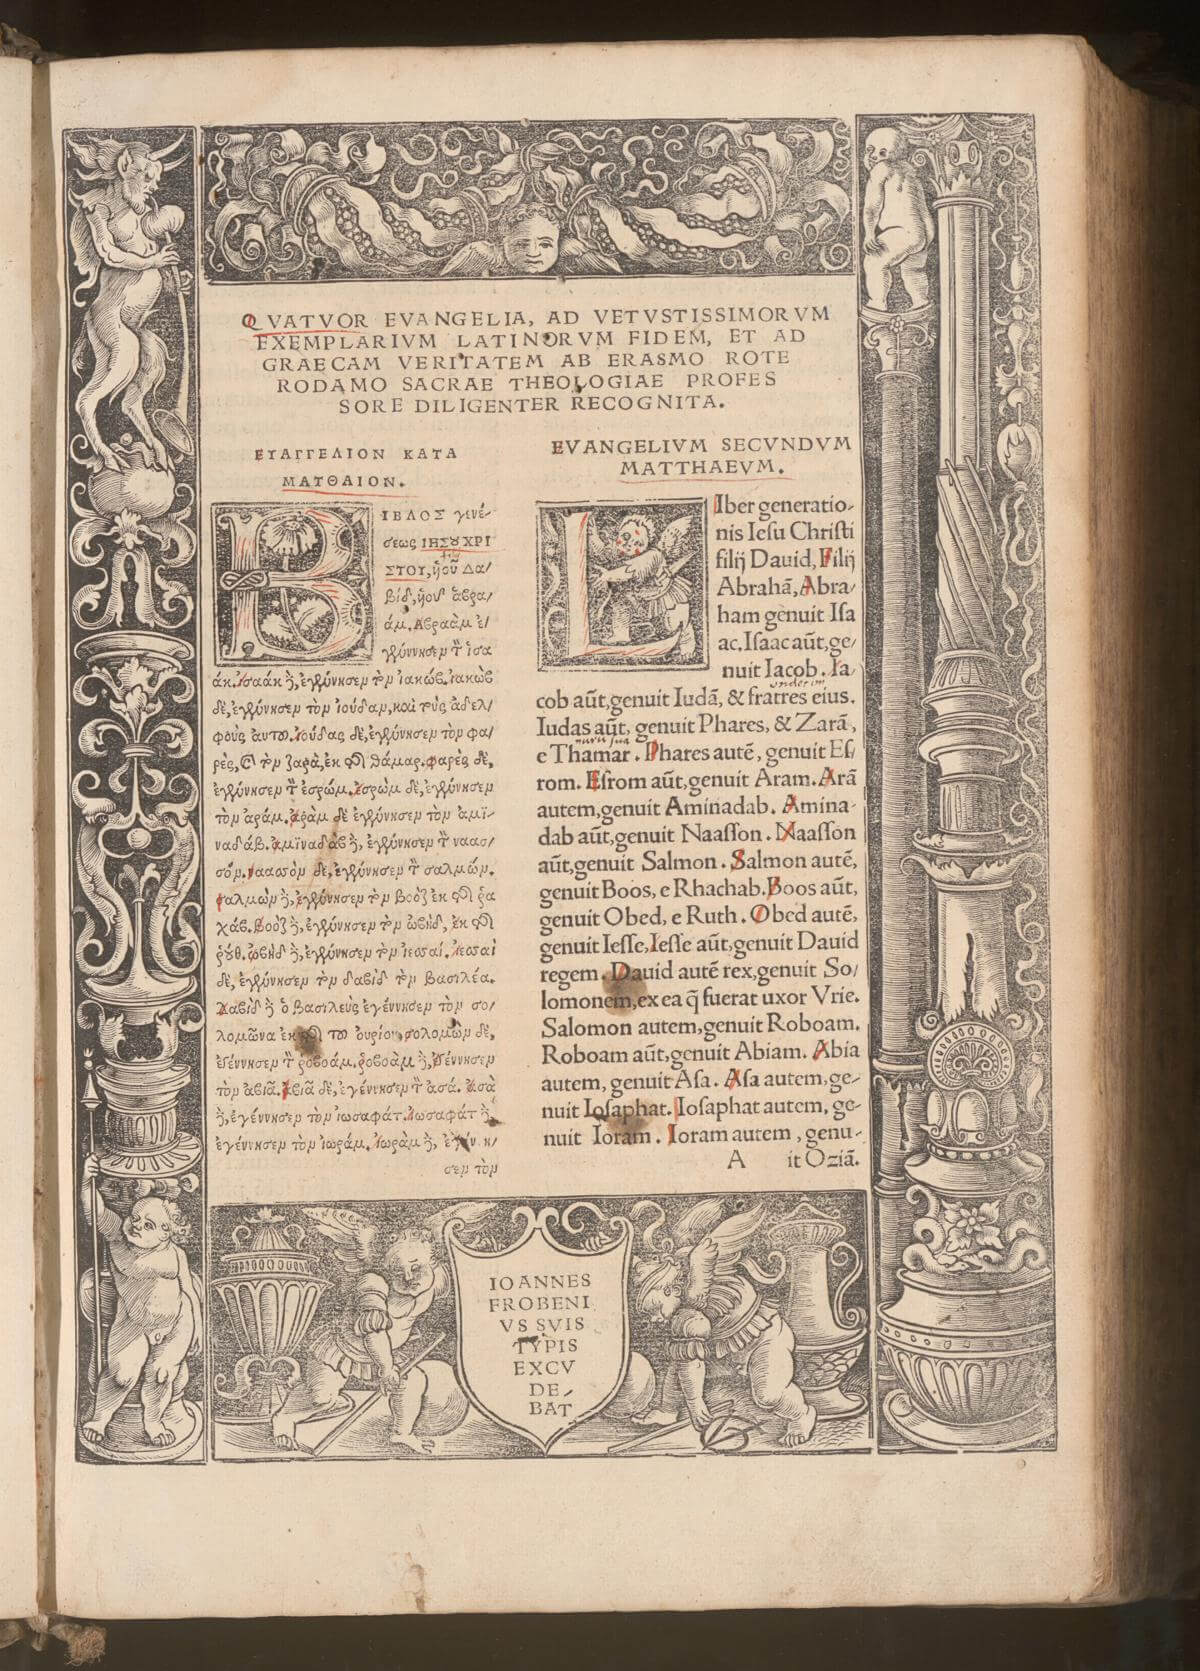 Erasmus's translation of the Bible from Greek into Latin is appropriately presented in two parallel columns. Here, the initial page of his New Testament is set off with woodcut borders; the following pages are plain columns of text.